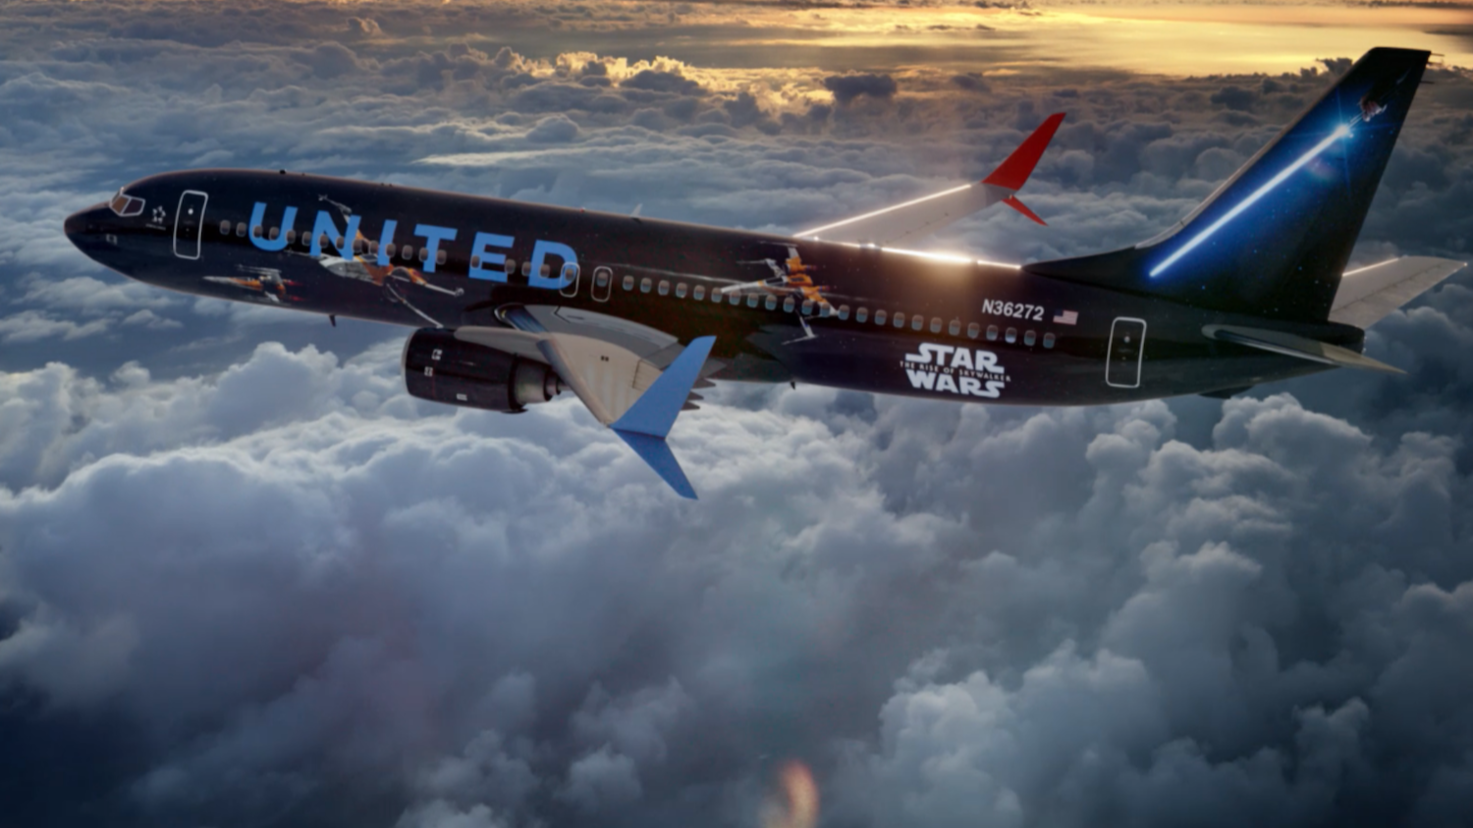 United Airlines partners with Star Wars franchise to create movie themed aircraft 